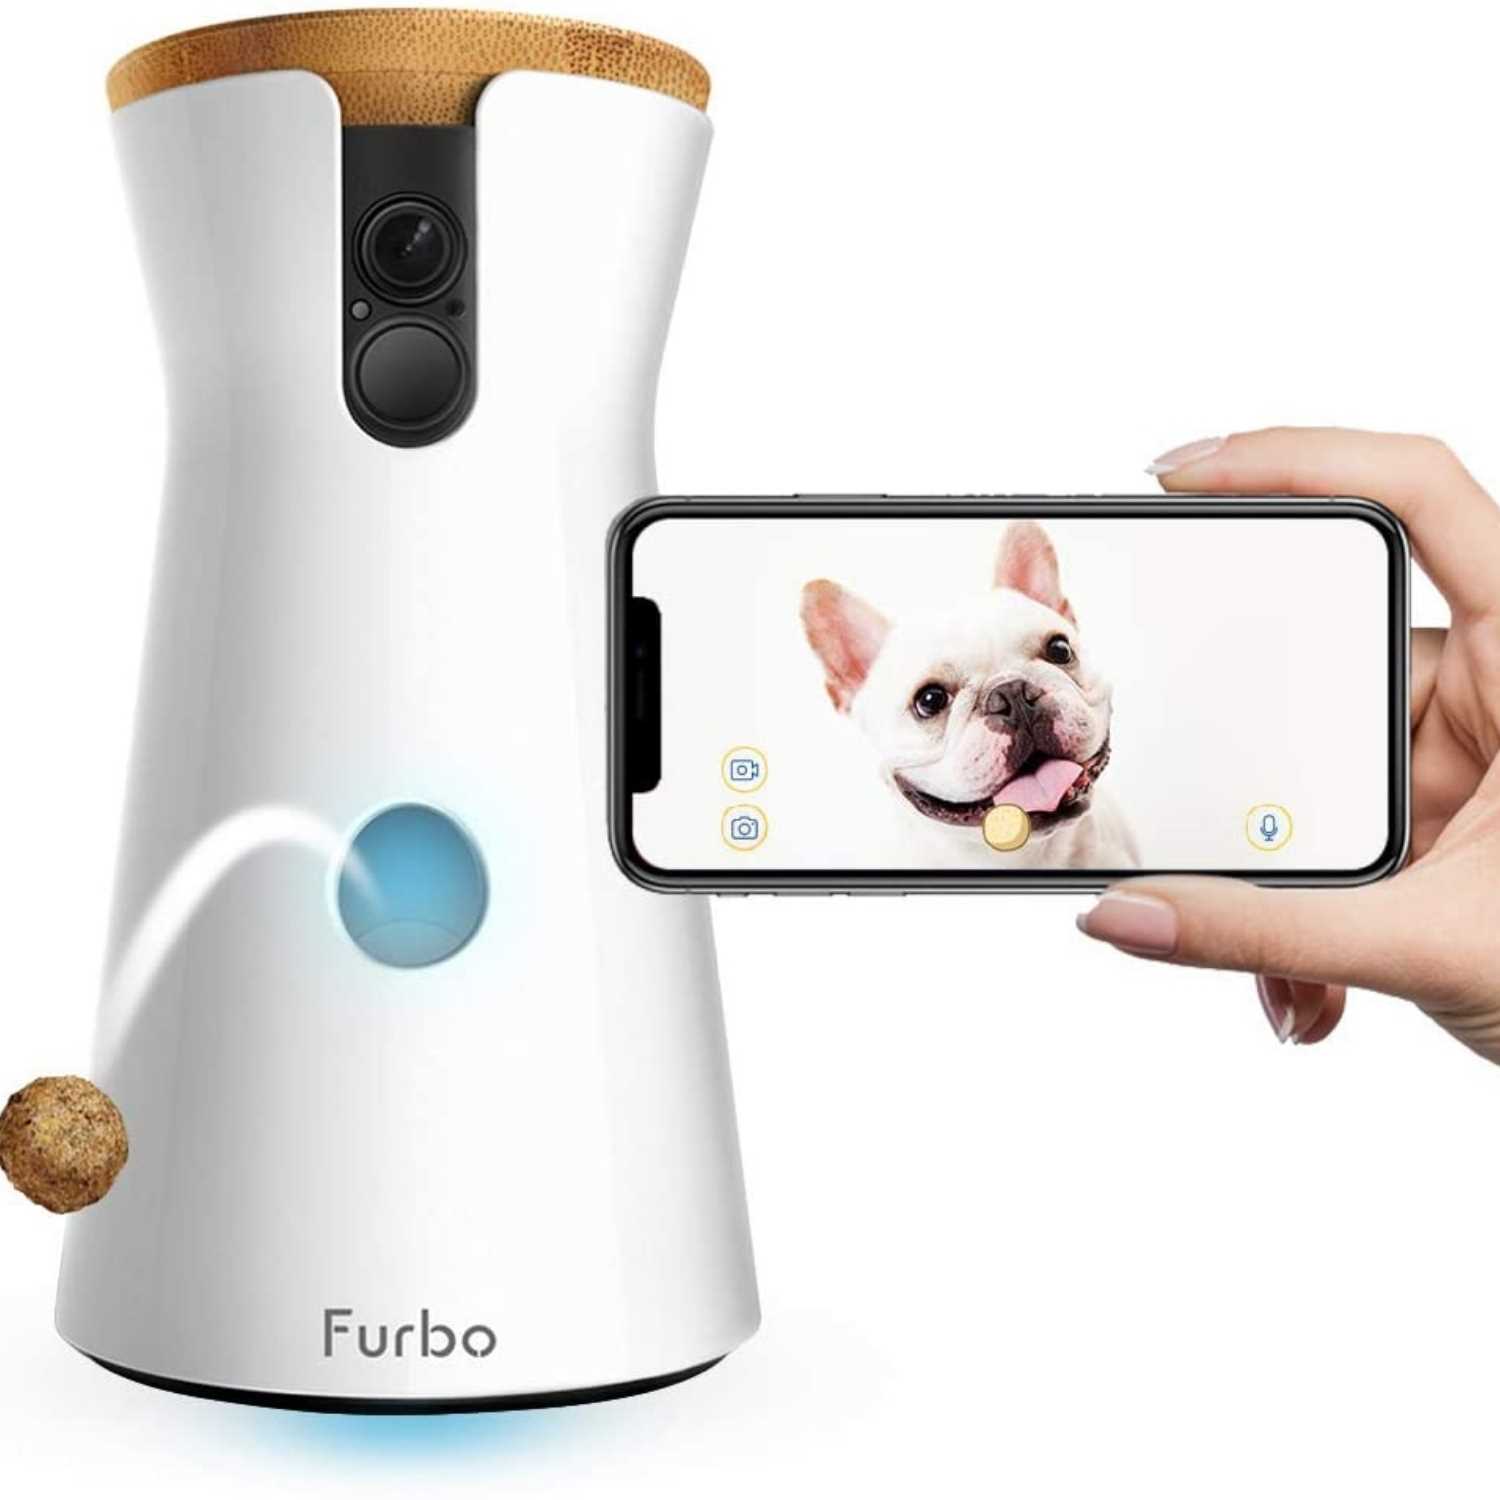 HD WiFi 2-Way Audio Interactive Dog Camera Main Image - Cool Birthday Gifts For Pet Lovers